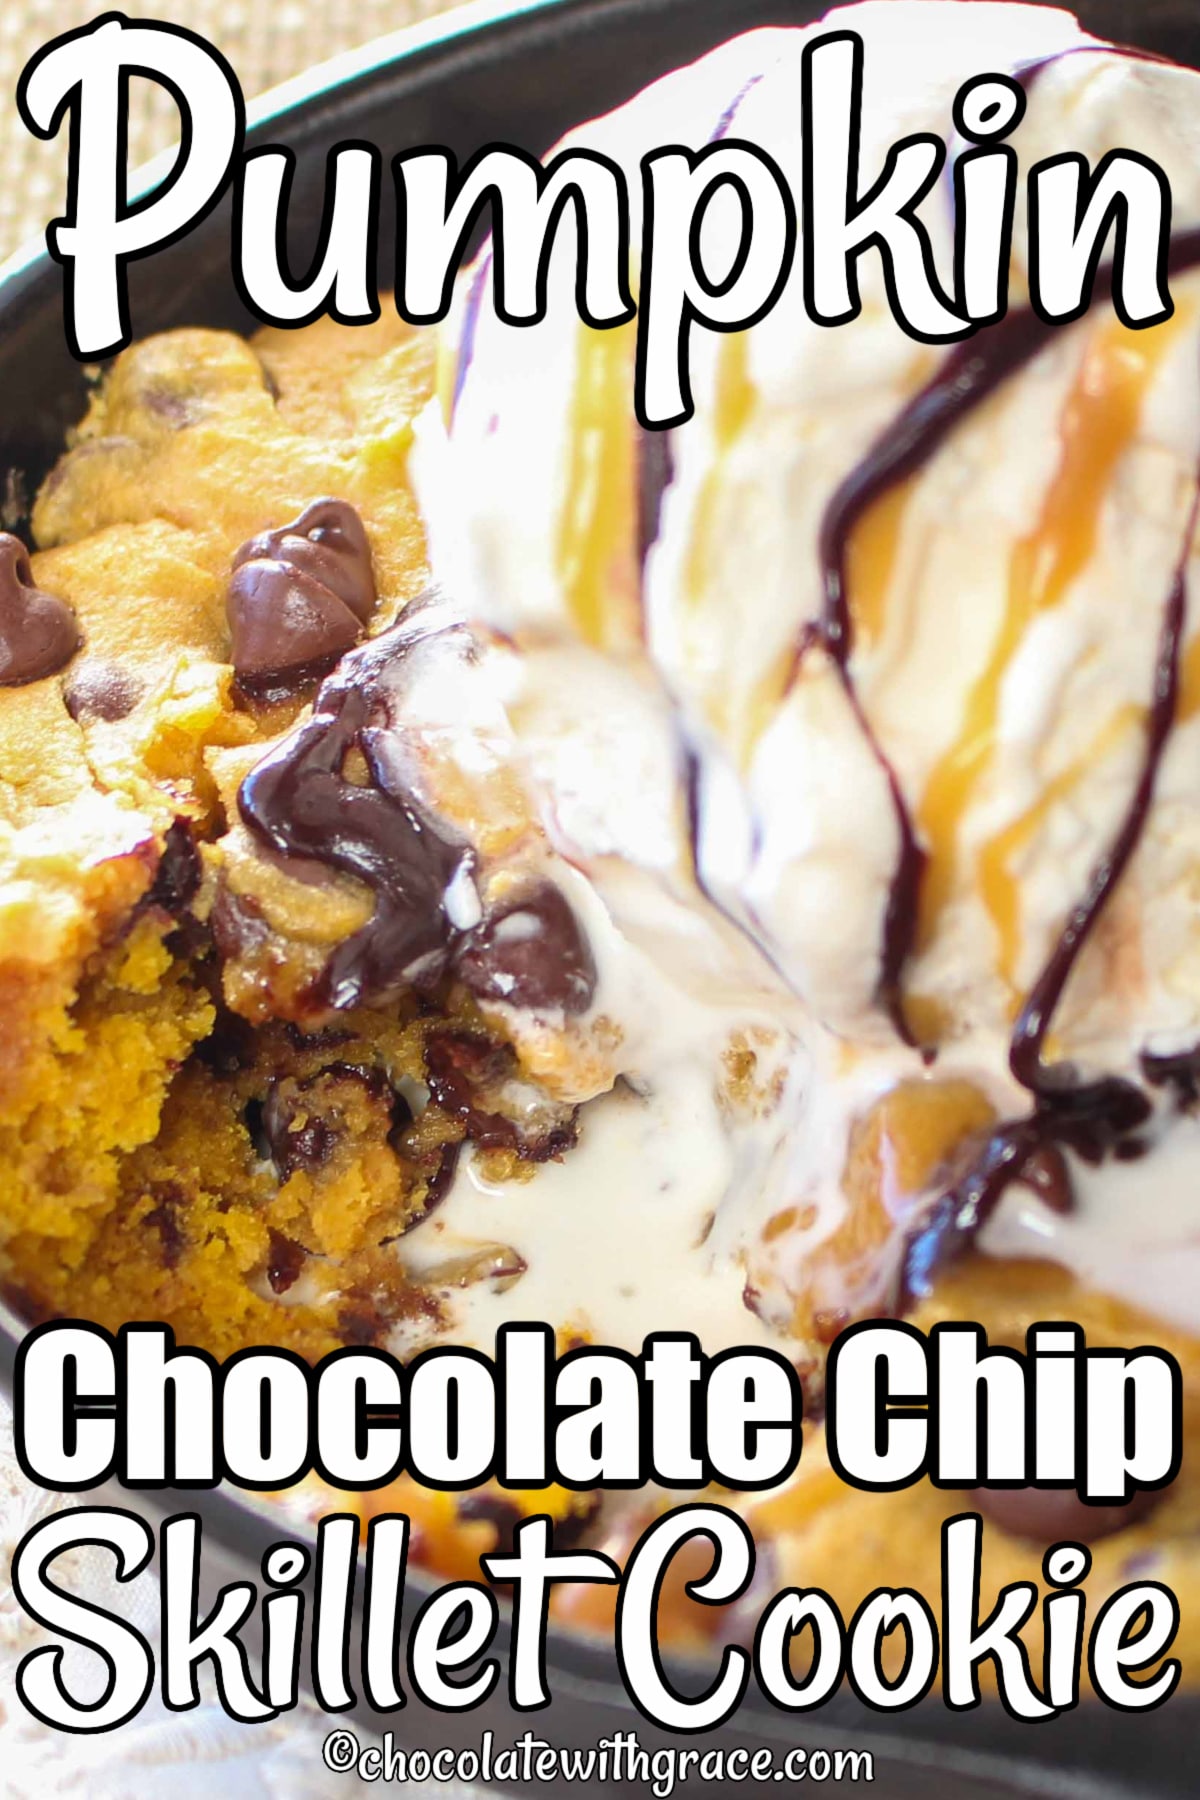 https://chocolatewithgrace.com/wp-content/uploads/2014/11/CWG-Pumpkin-Skillet-Cookie-Pin-photo.jpg